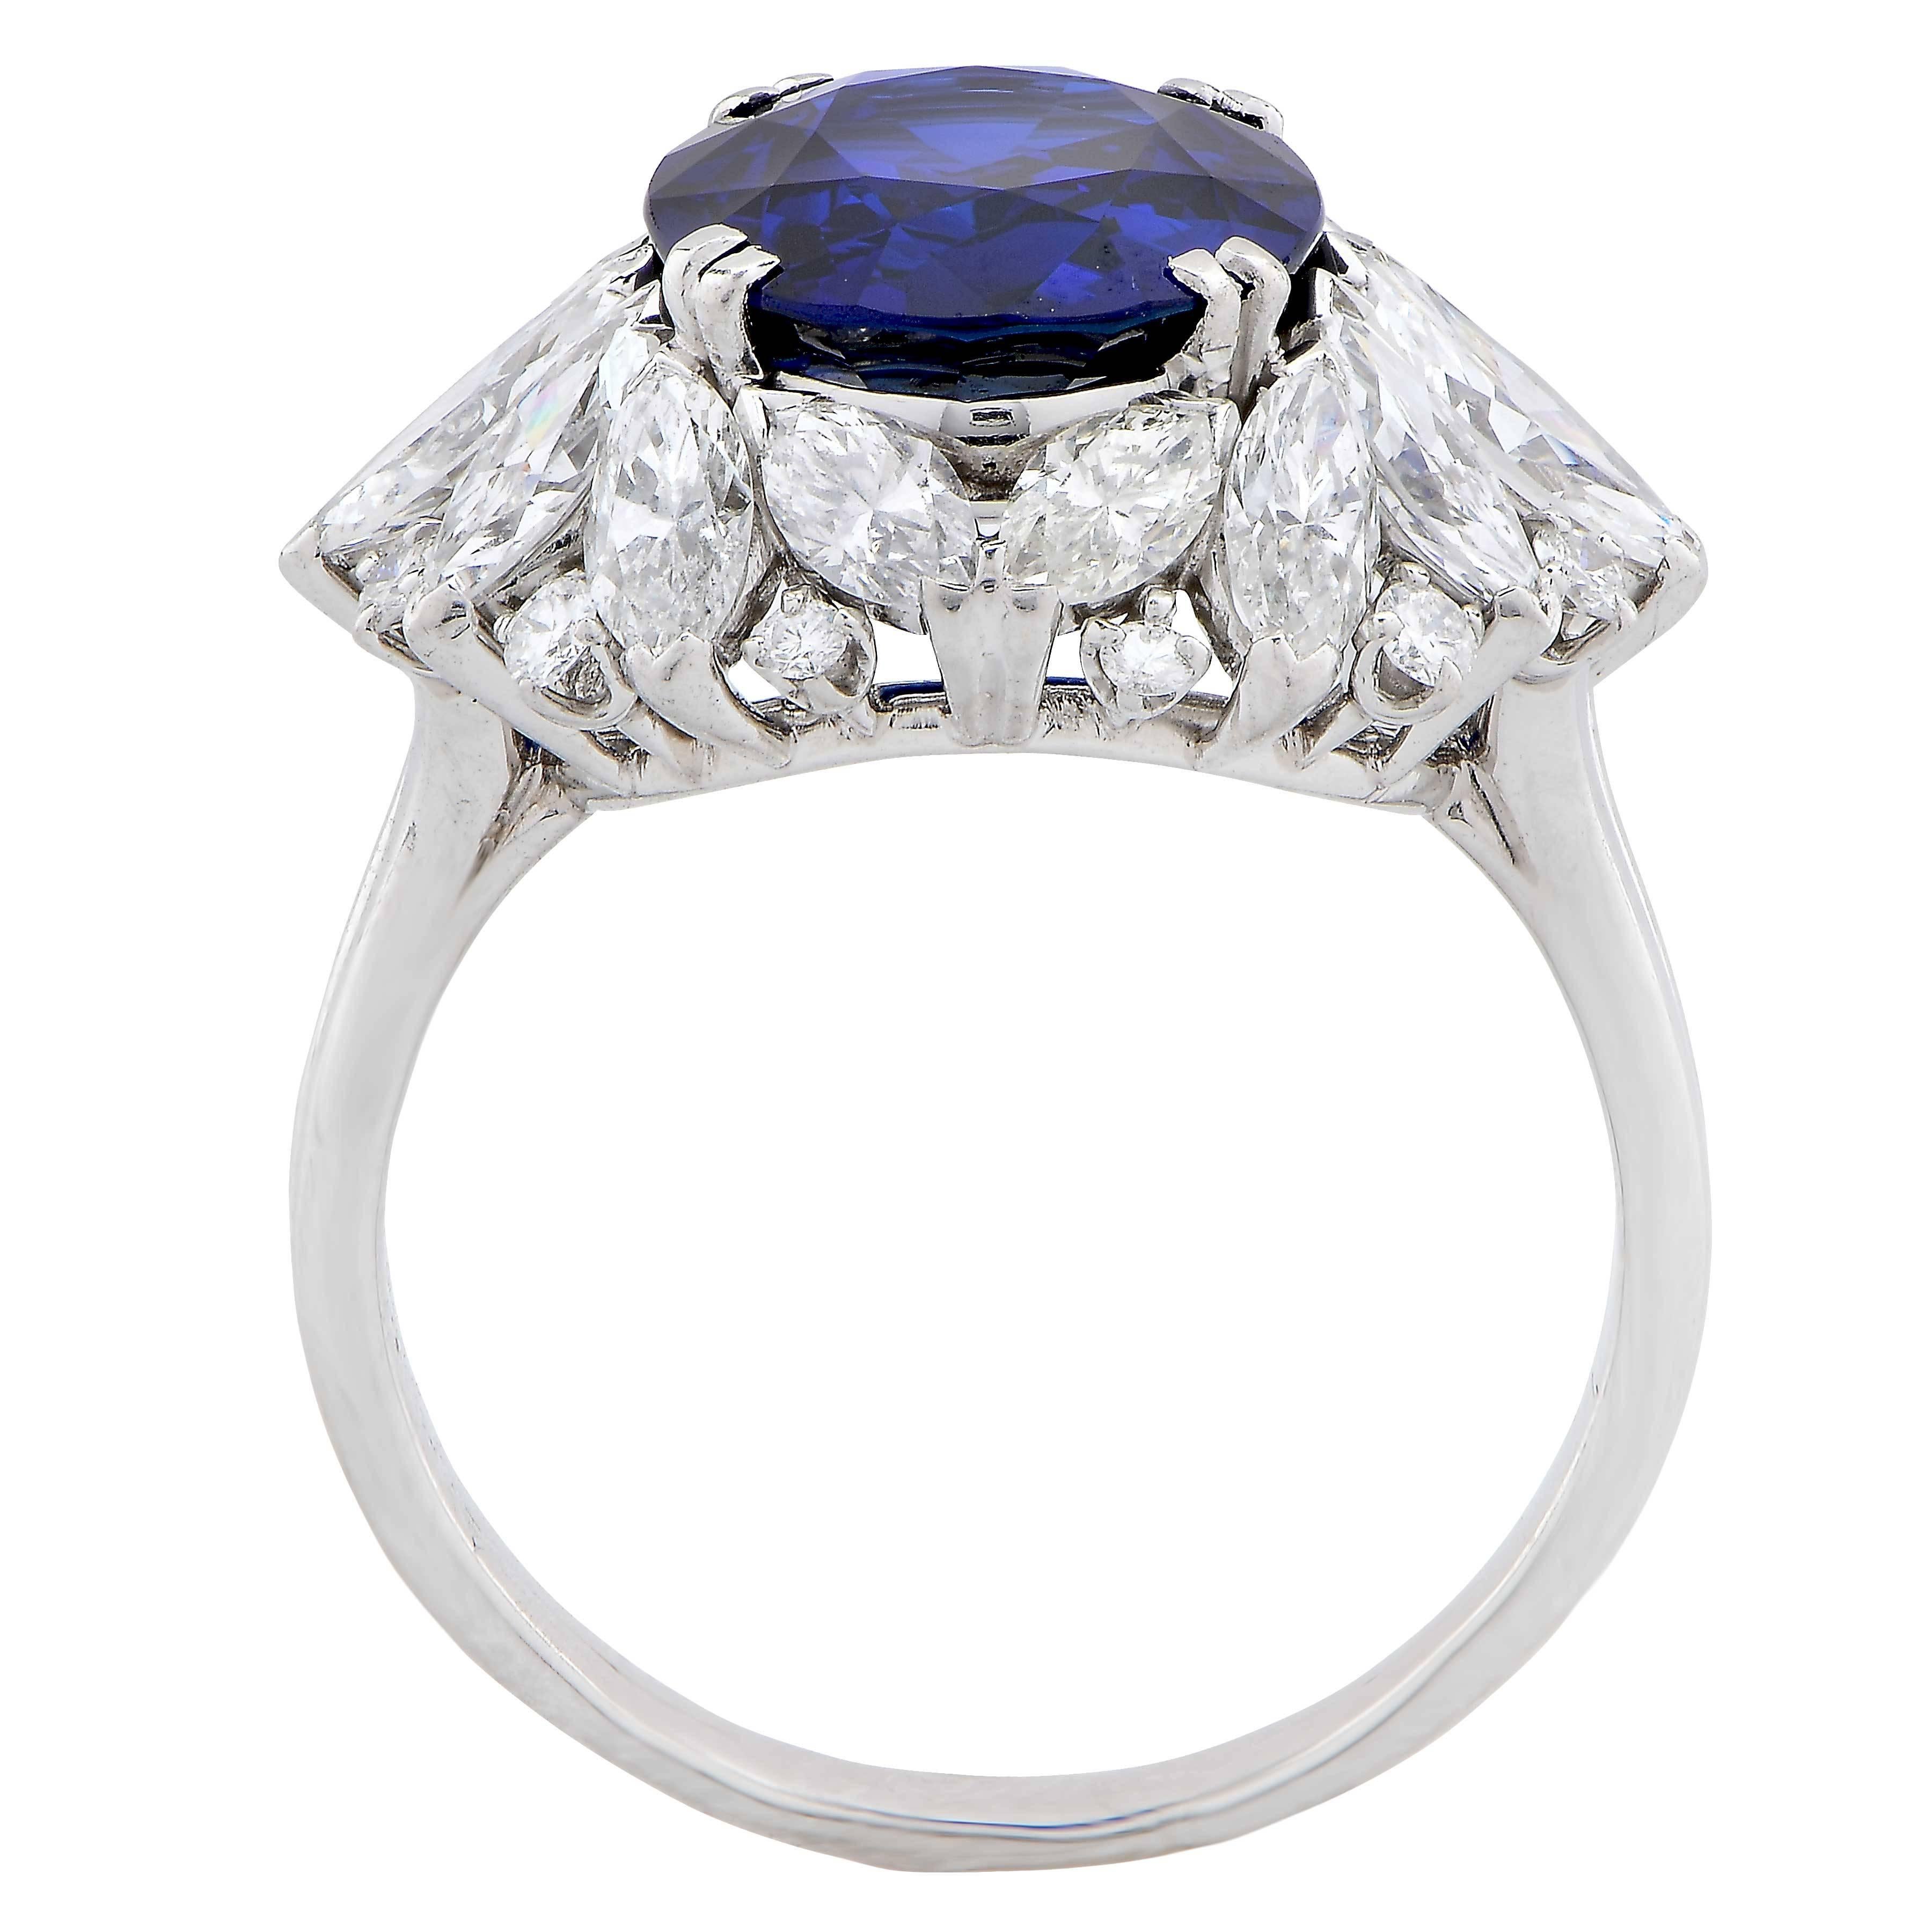 Oval Cut Harry Winston 5.78 Carat Natural Sapphire and Diamond Platinum Cocktail Ring